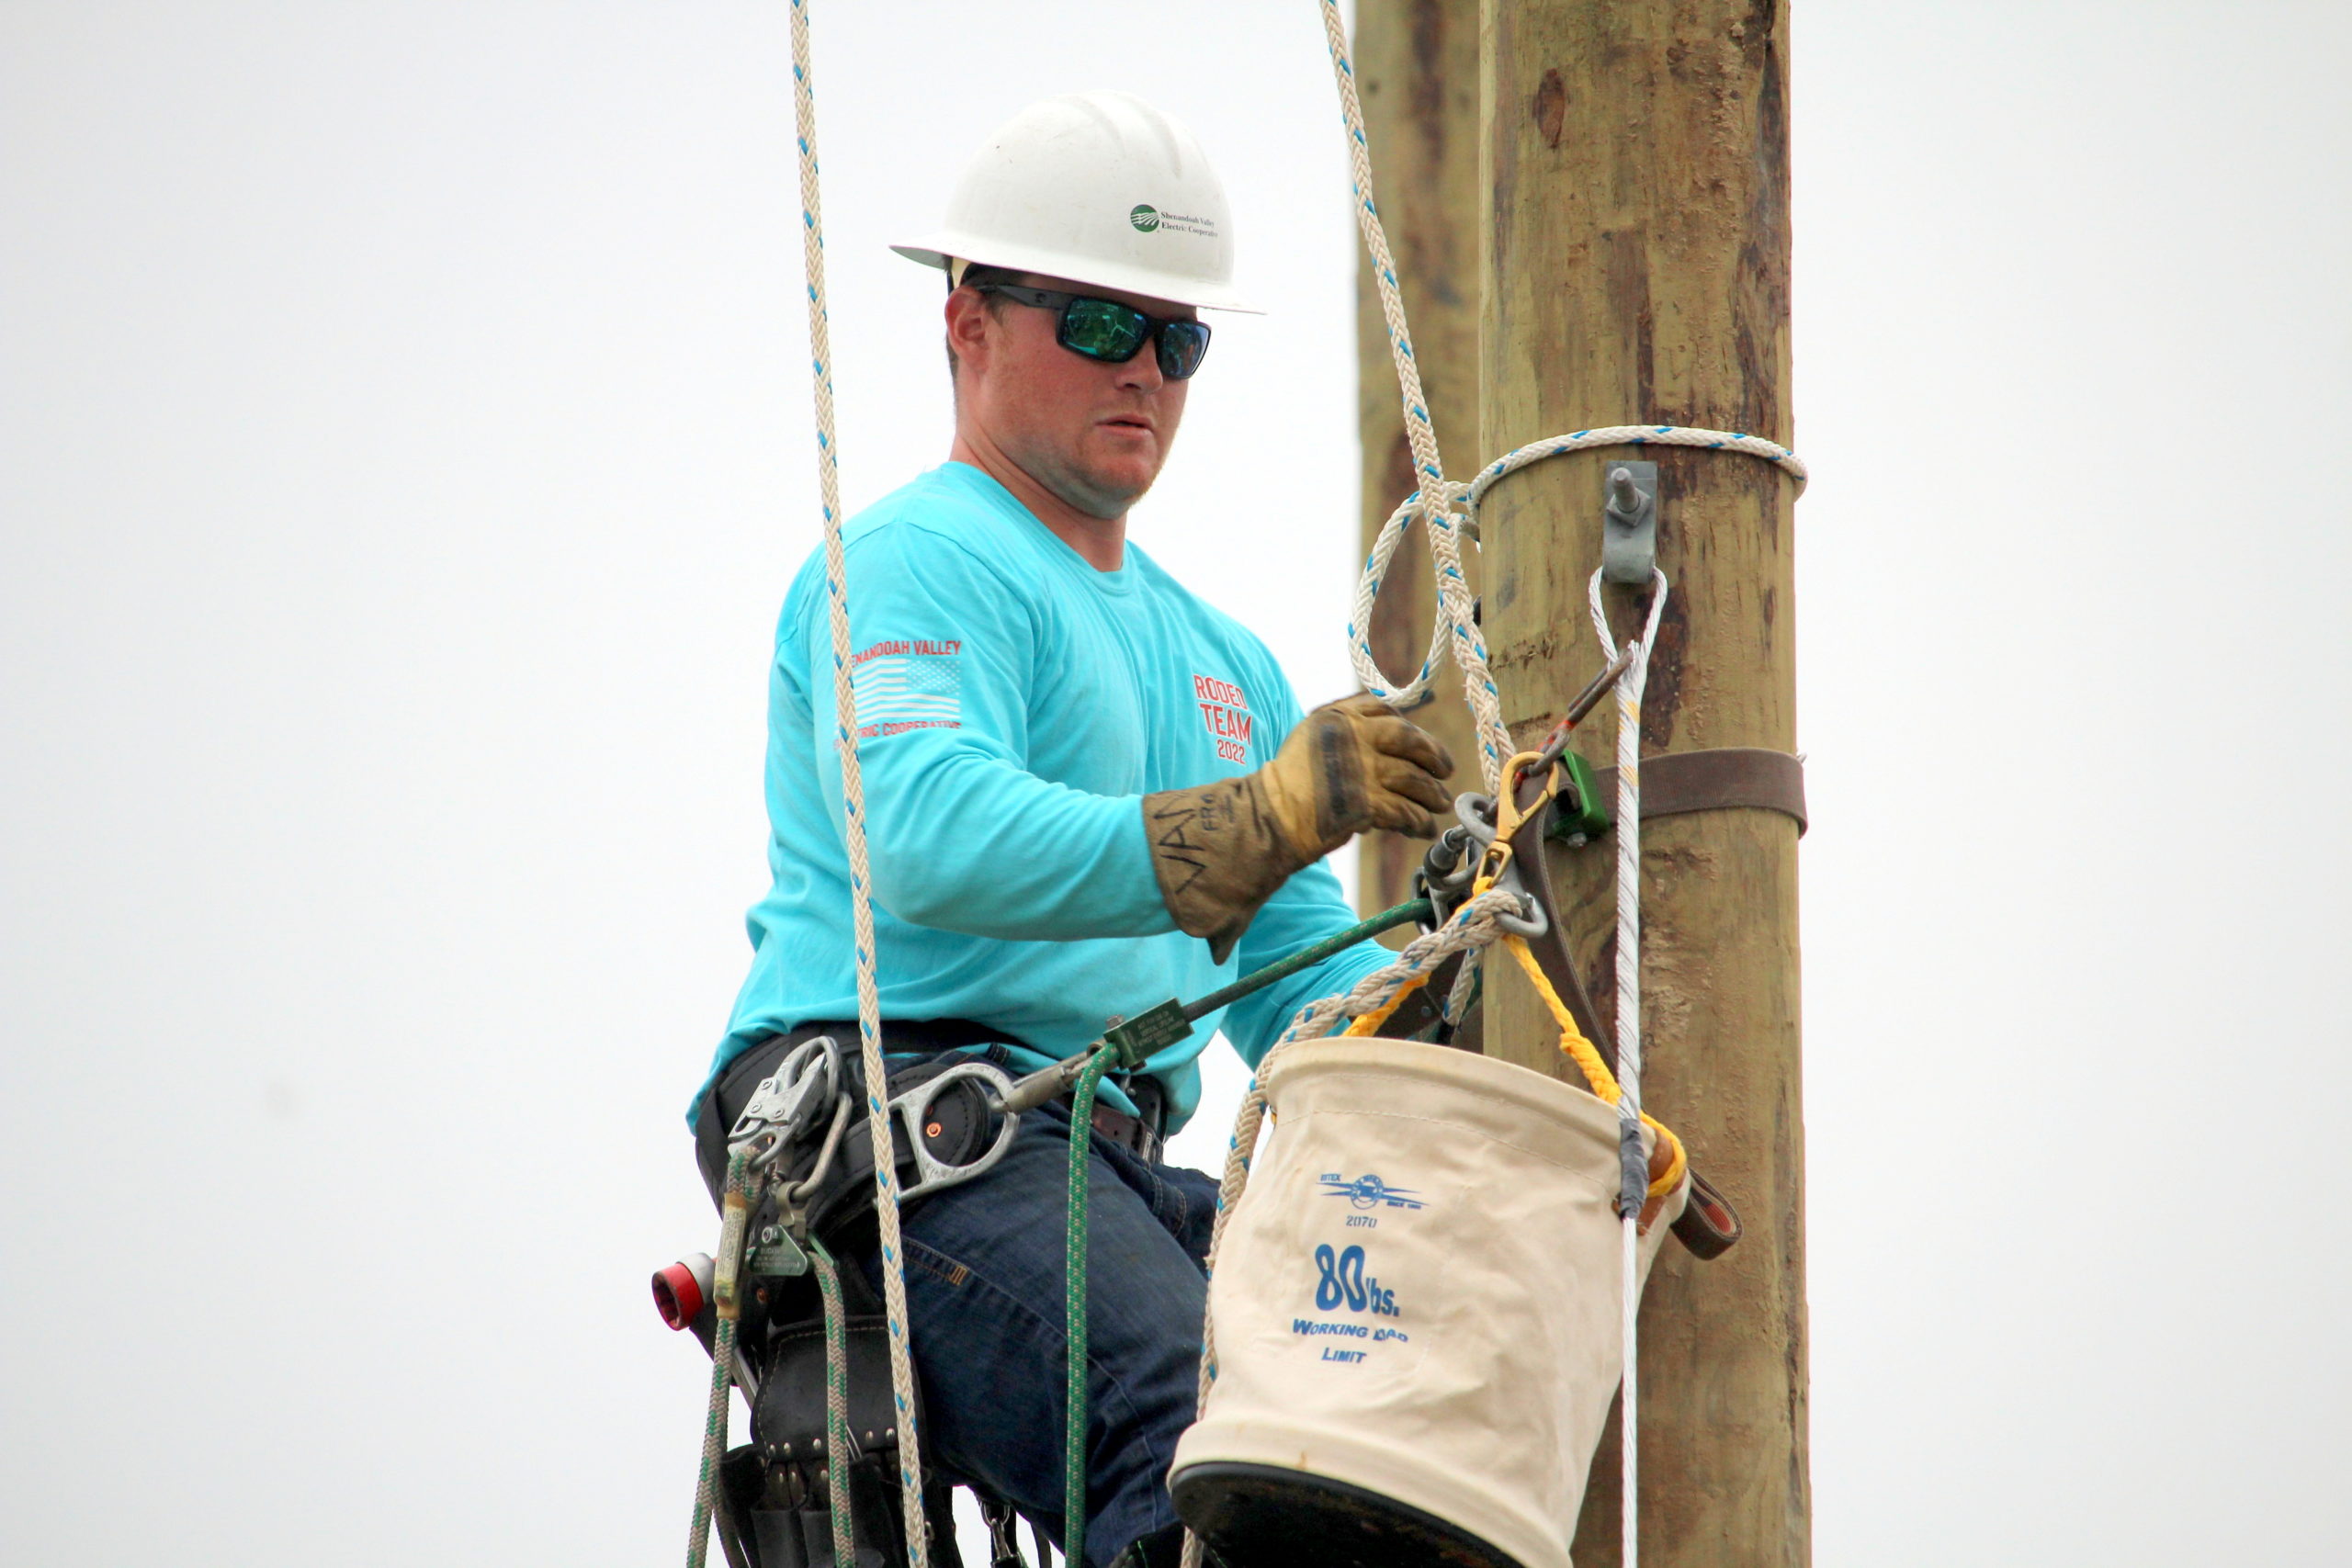 Shenandoah Valley Electric Cooperative lineman competes.